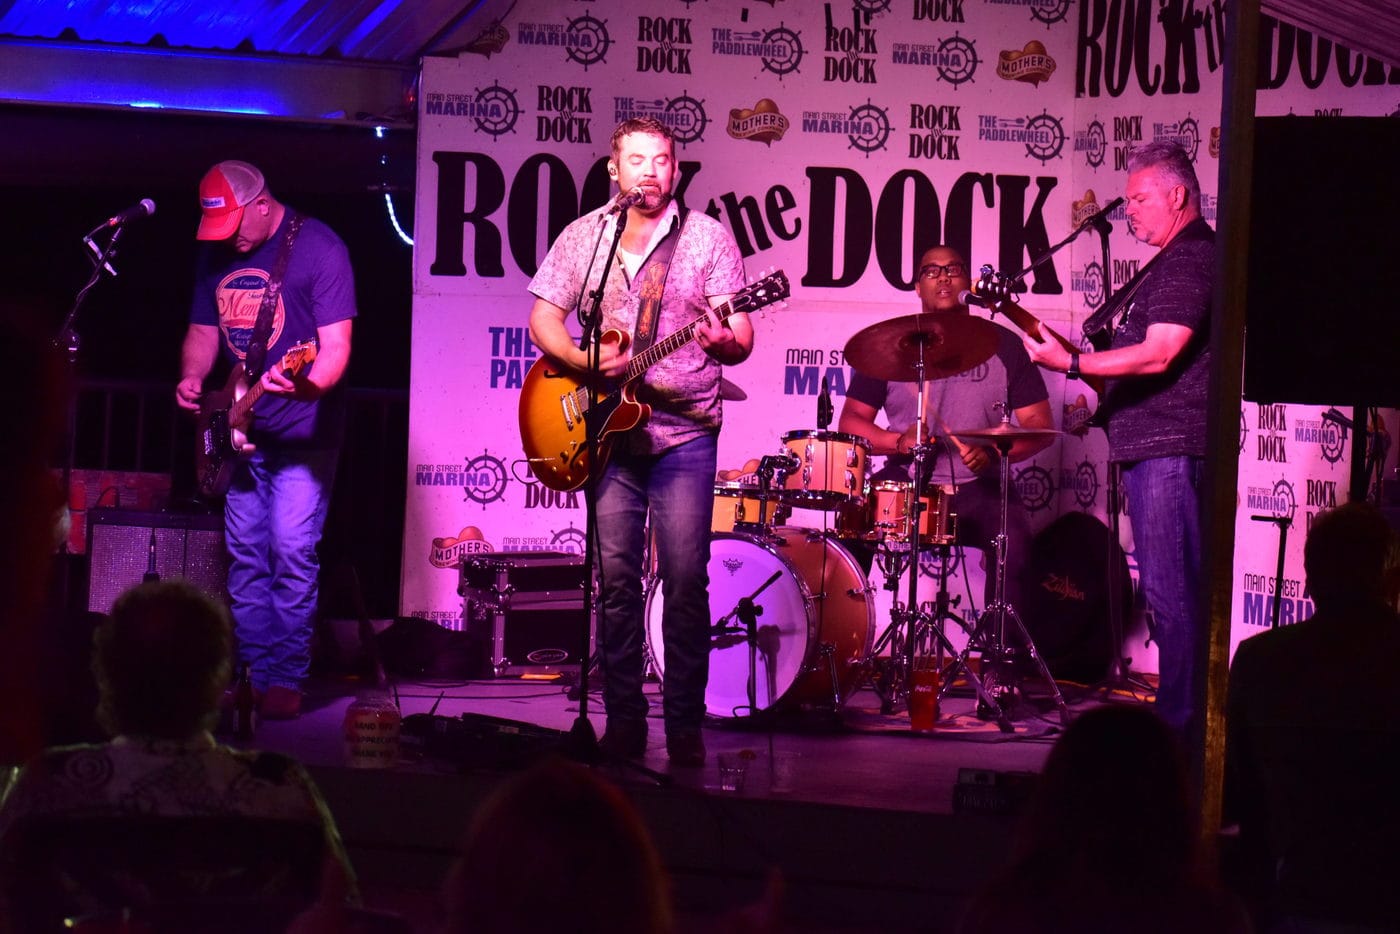 412 West Rocks The Dock at The Paddlewheel